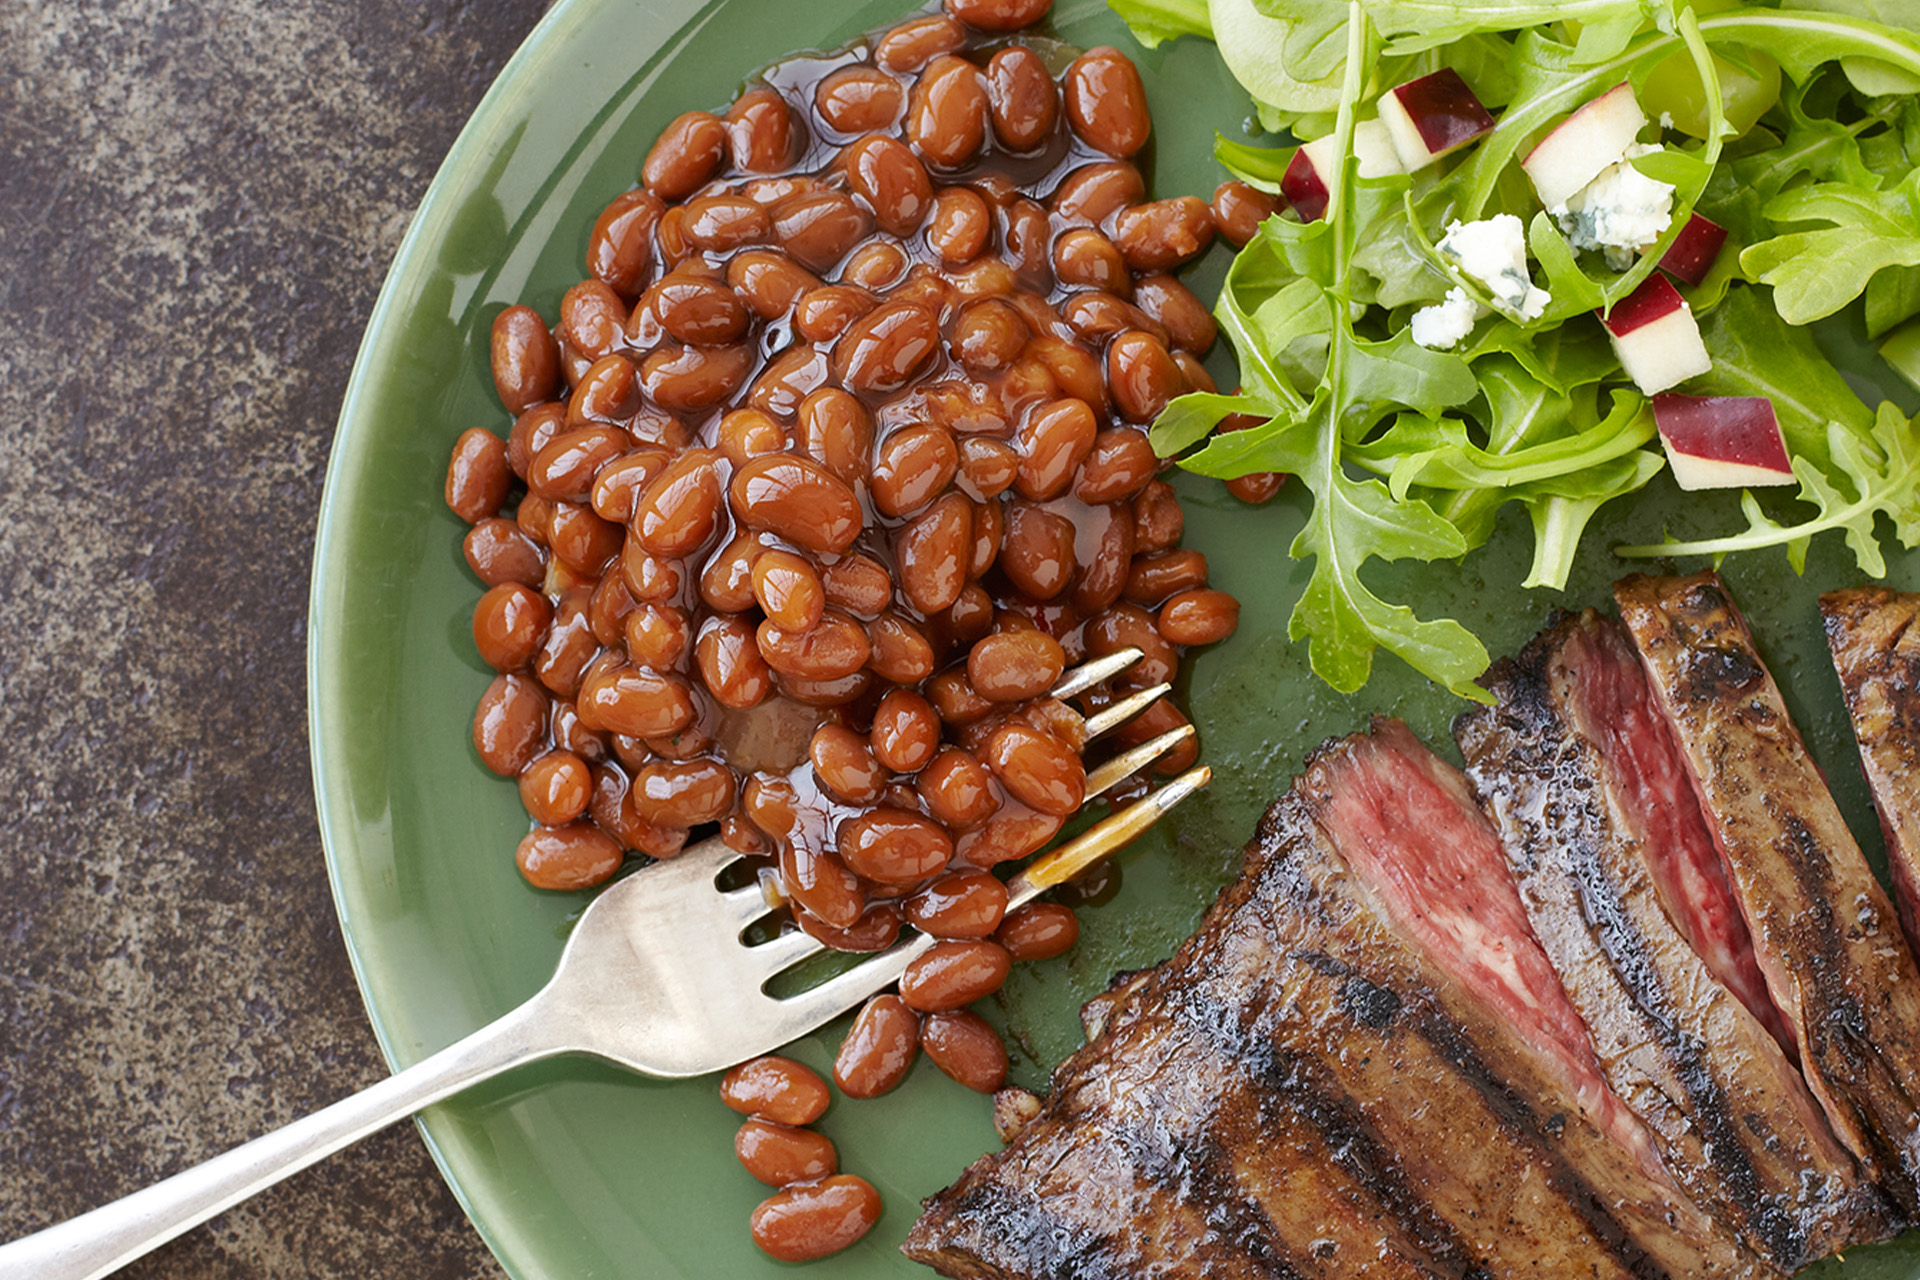 Sliced marinated steak with baked beans and a green salad with pear and bleu cheese on a white plate